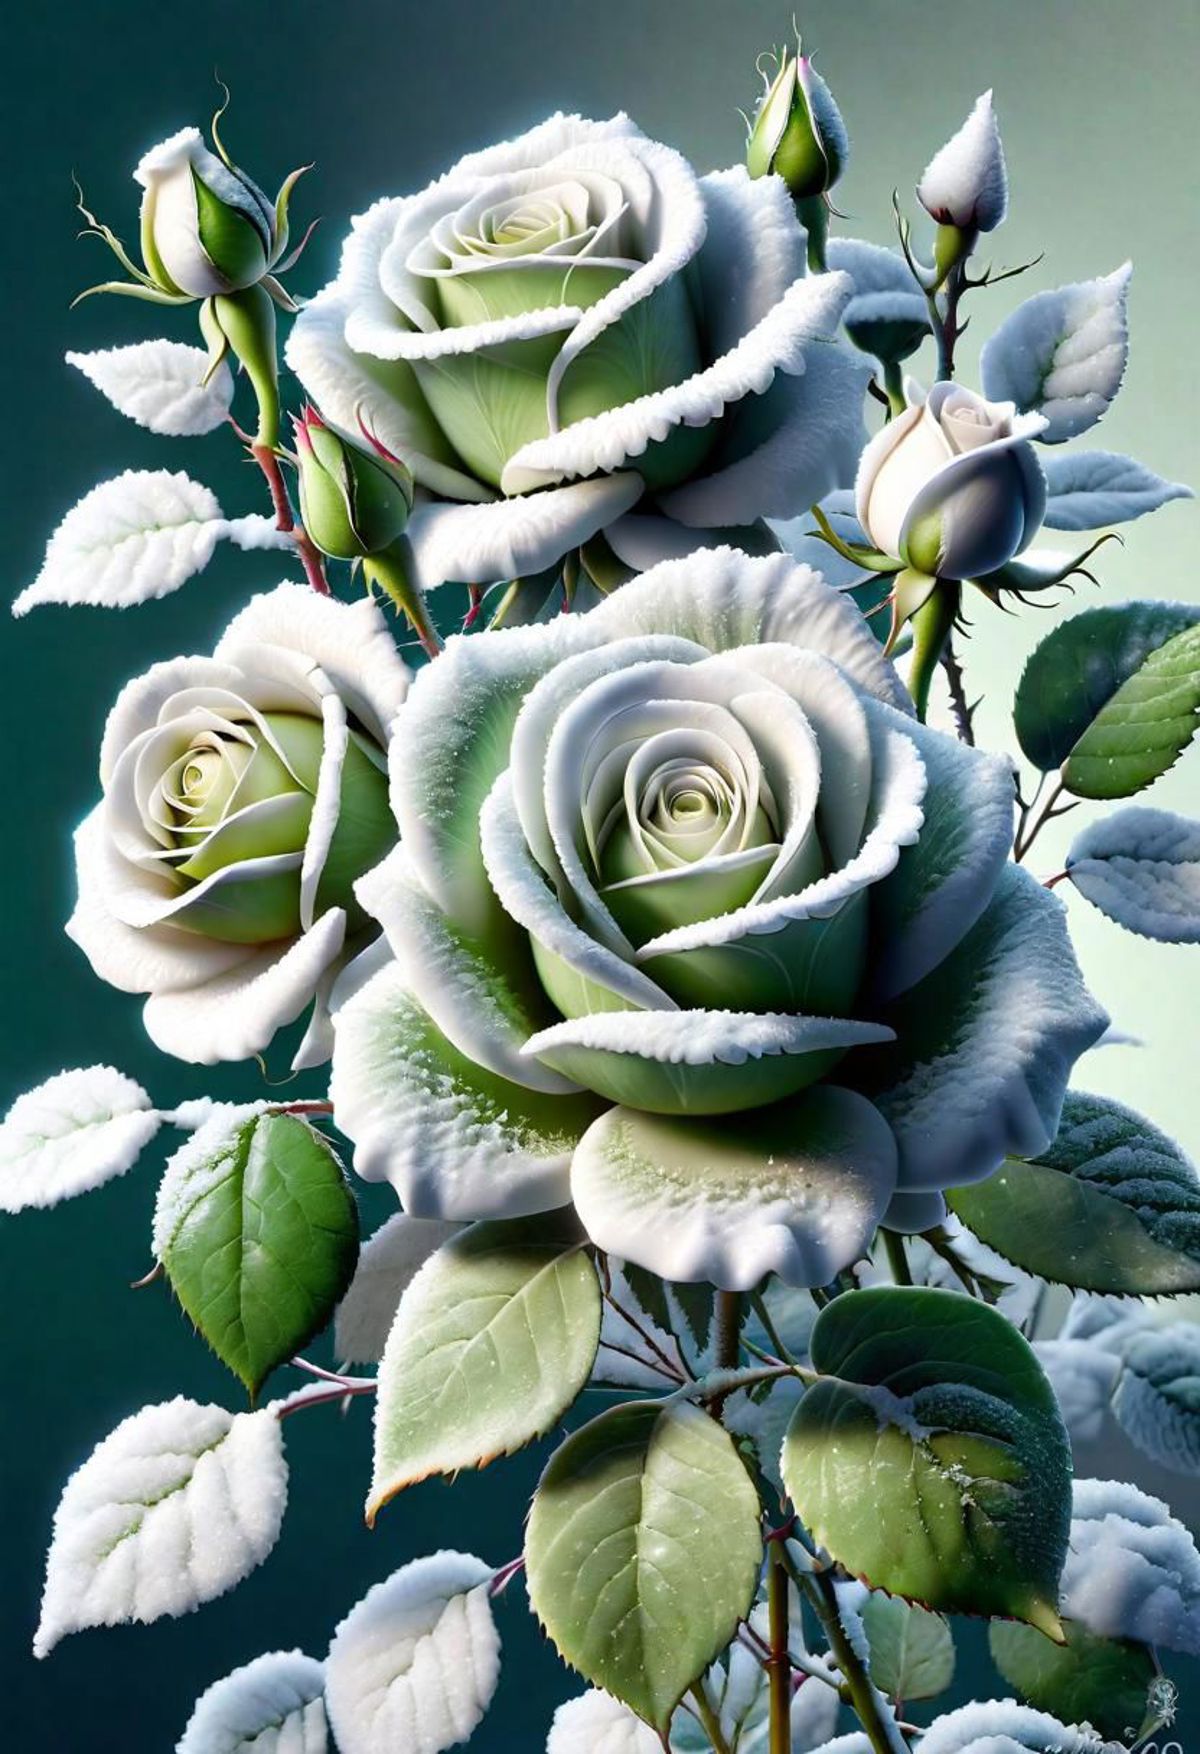 A bouquet of white roses with green leaves.